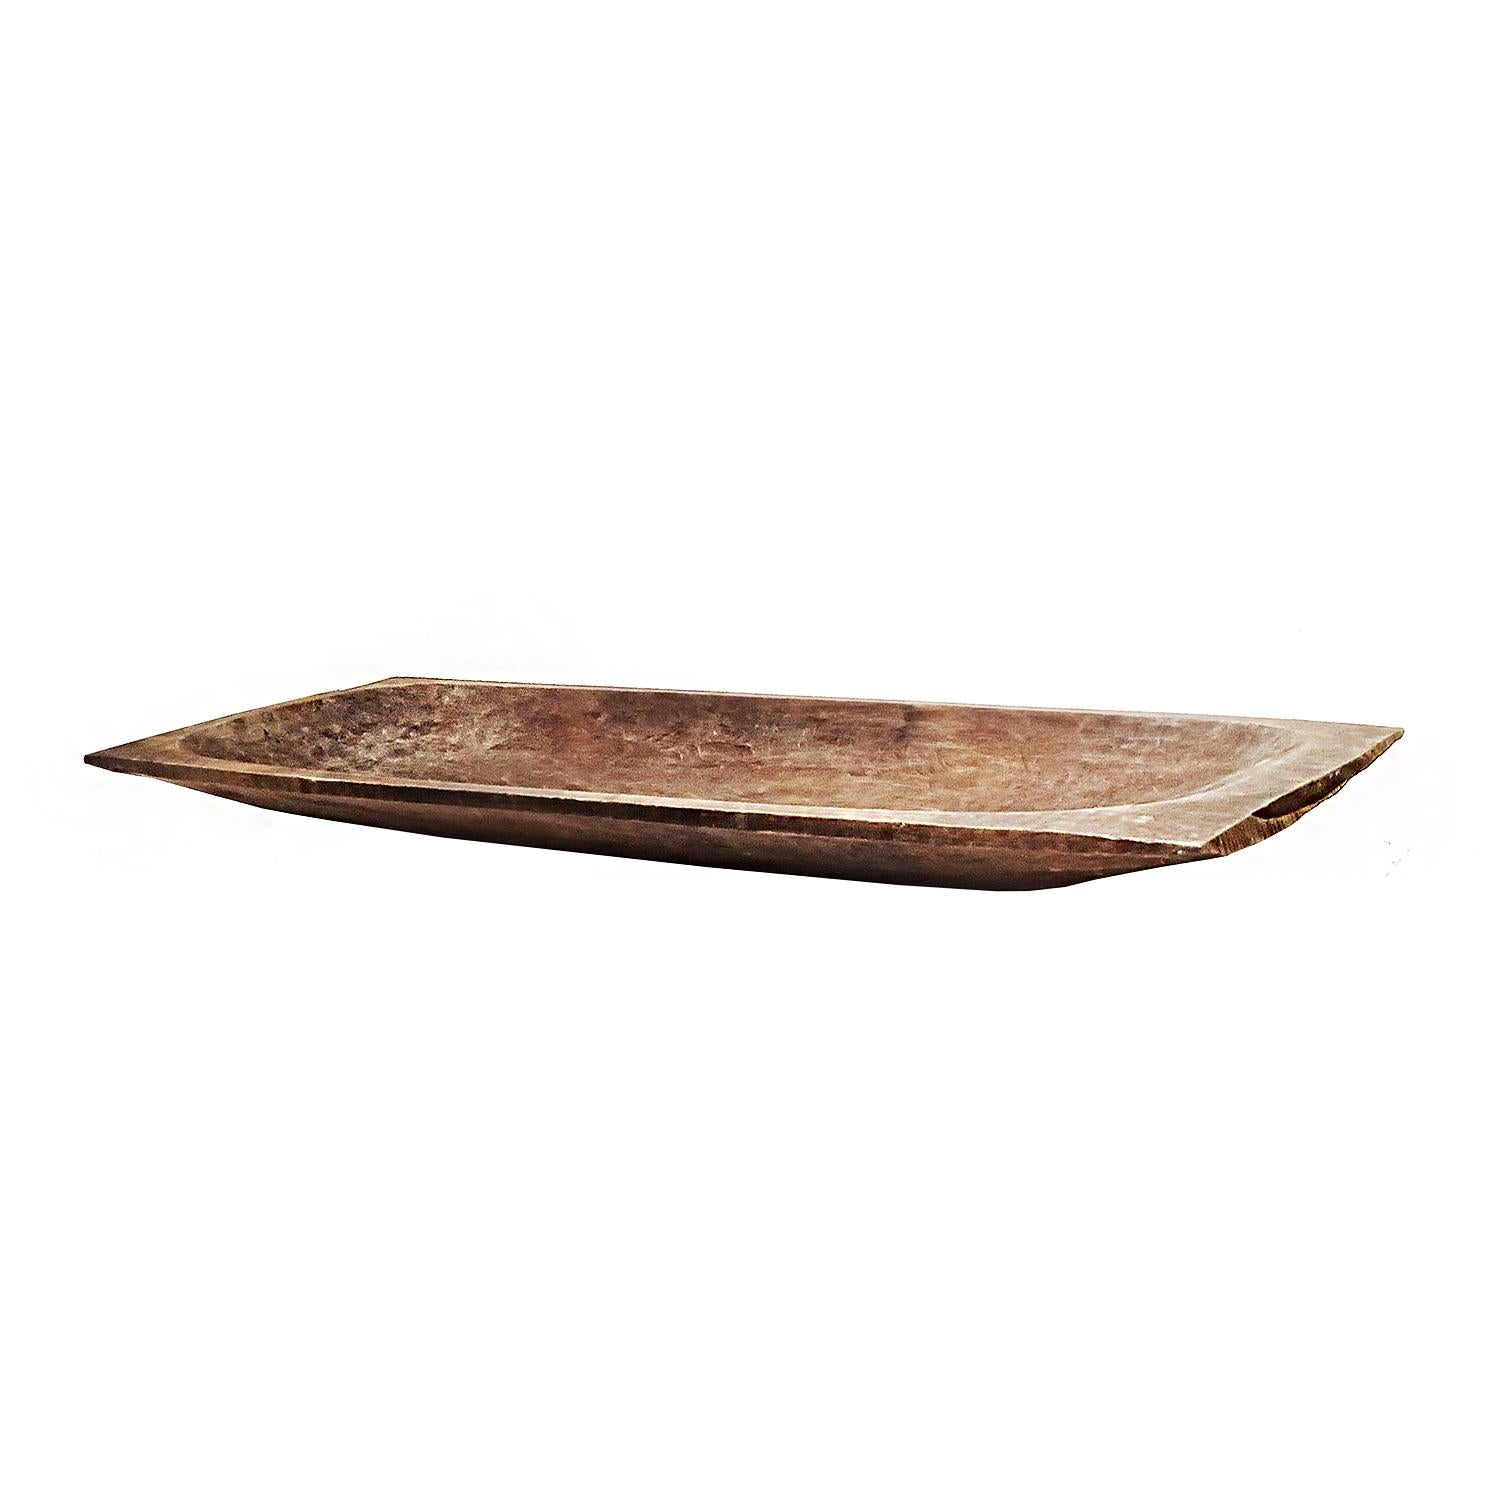 Late 20th Century Hand-Carved Rectangular Wood Tray from Indonesia, Contemporary For Sale